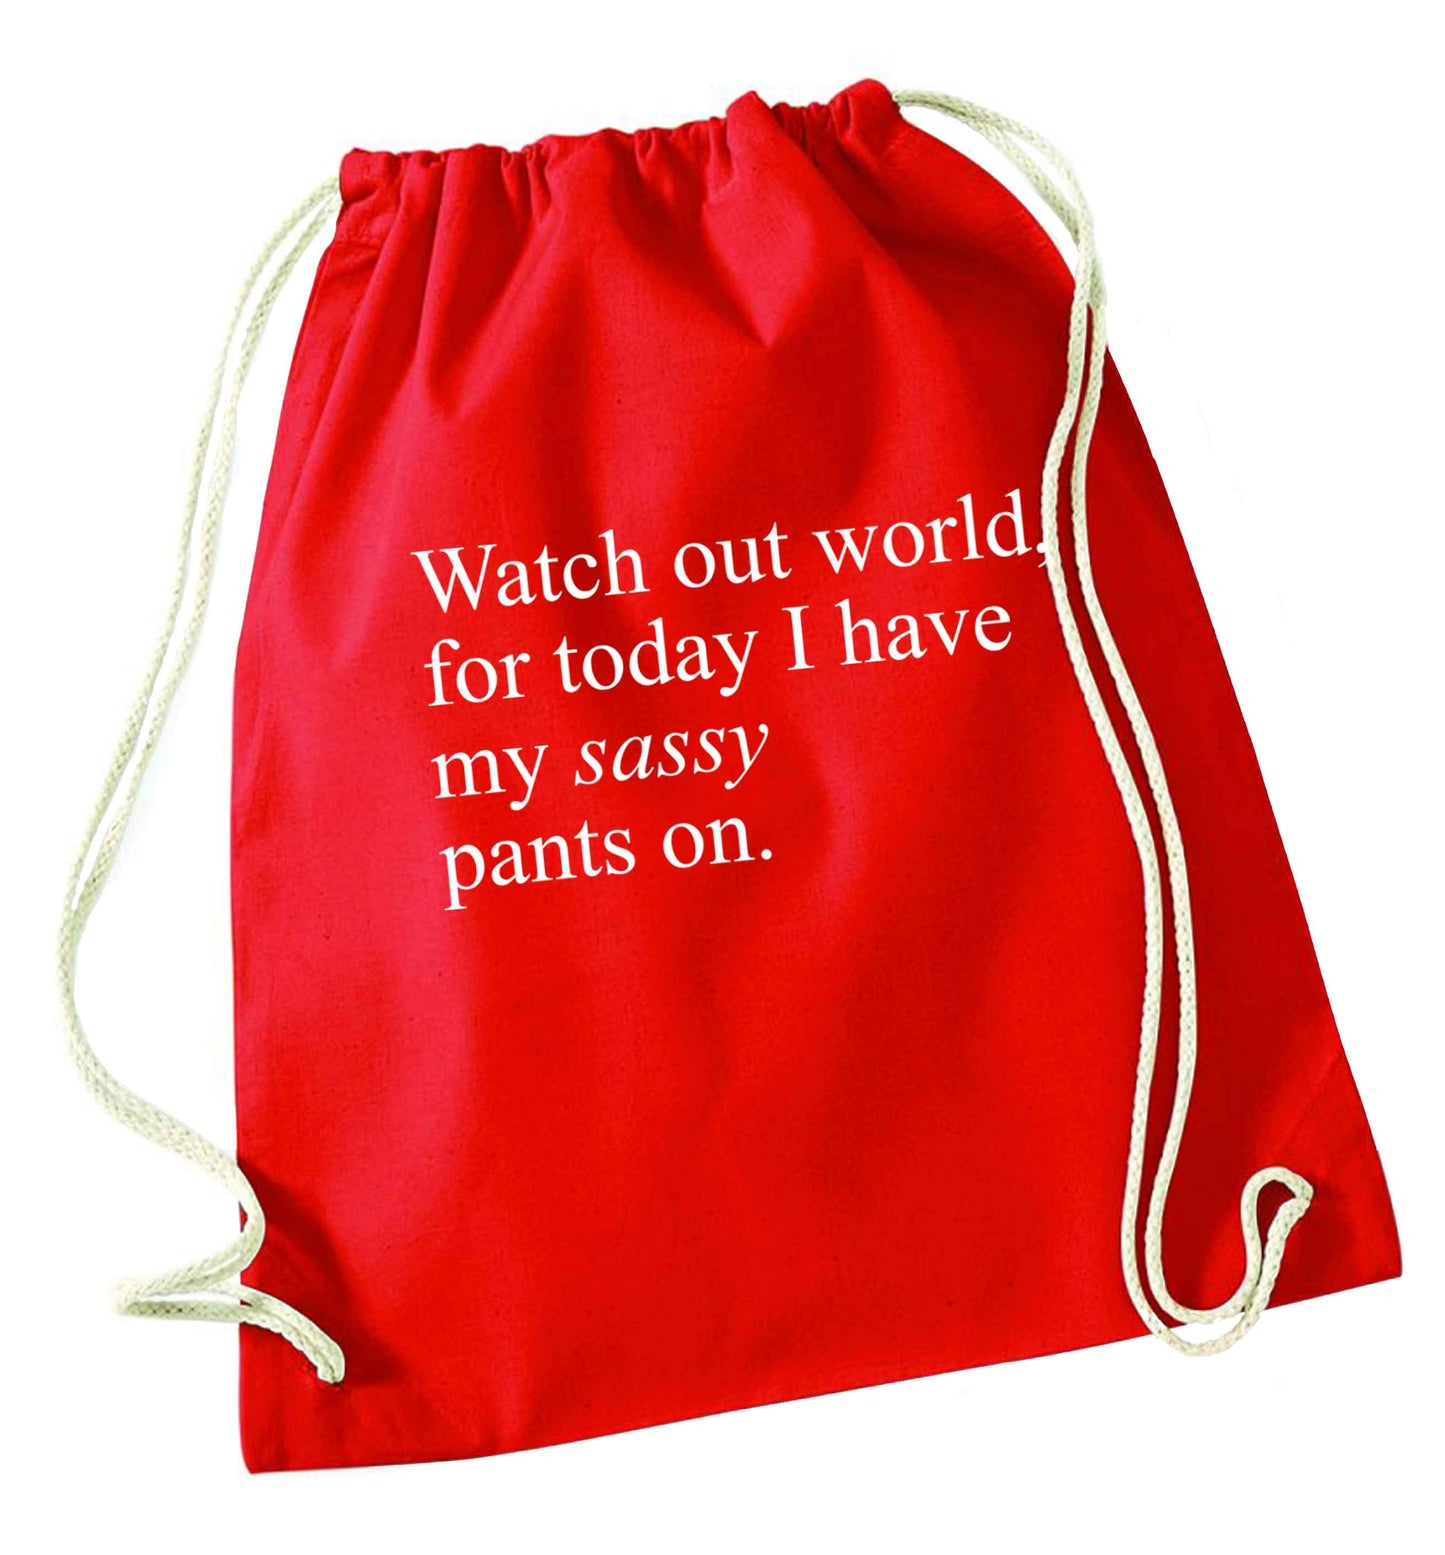 Watch out world for today I have my sassy pants on red drawstring bag 